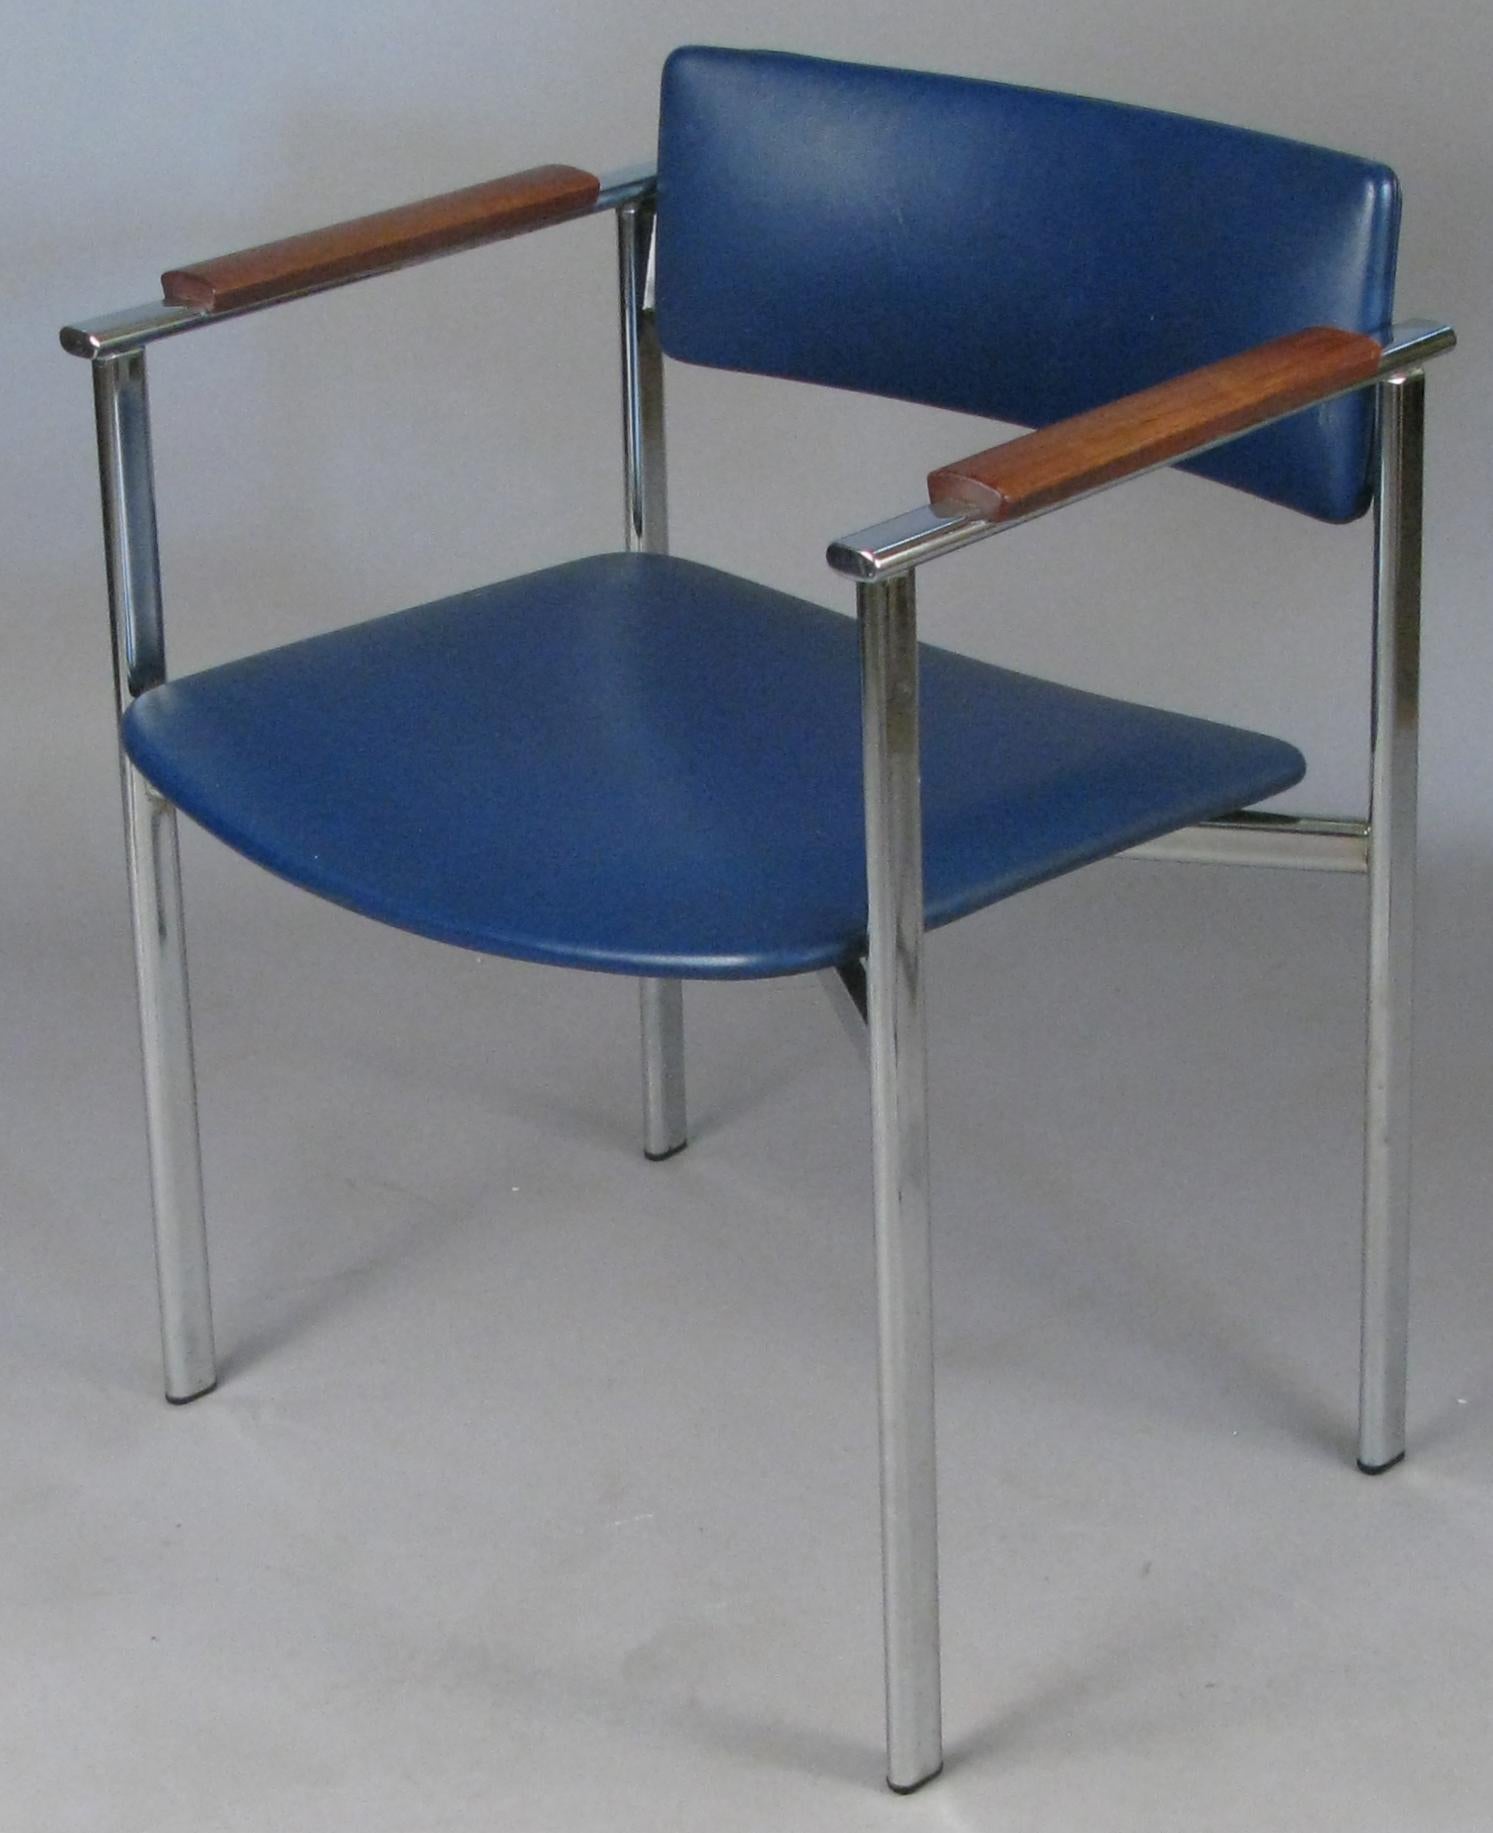 A beautiful set of vintage 1960s chrome dining chairs with walnut arms designed by Ilmari Tapiovaara, made in Finland and imported by Stendig. In their original blue vinyl upholstery. Great design in these Classic modern chairs. The set includes a